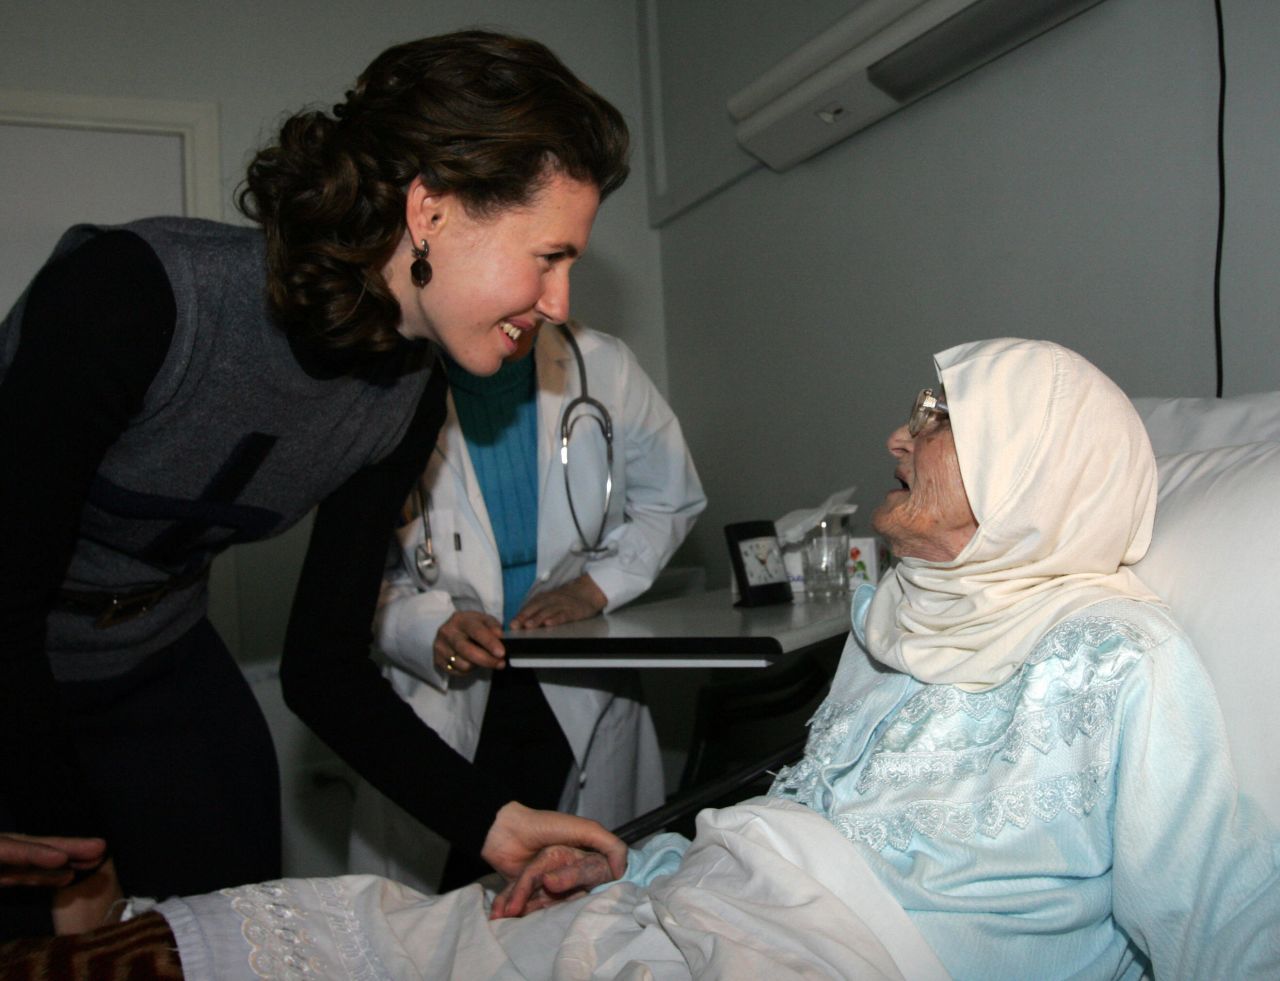 On the first day of the Eid al-Adha, Asma al-Assad visits a resident at a home for the elderly in Damascus, on December 19, 2007.